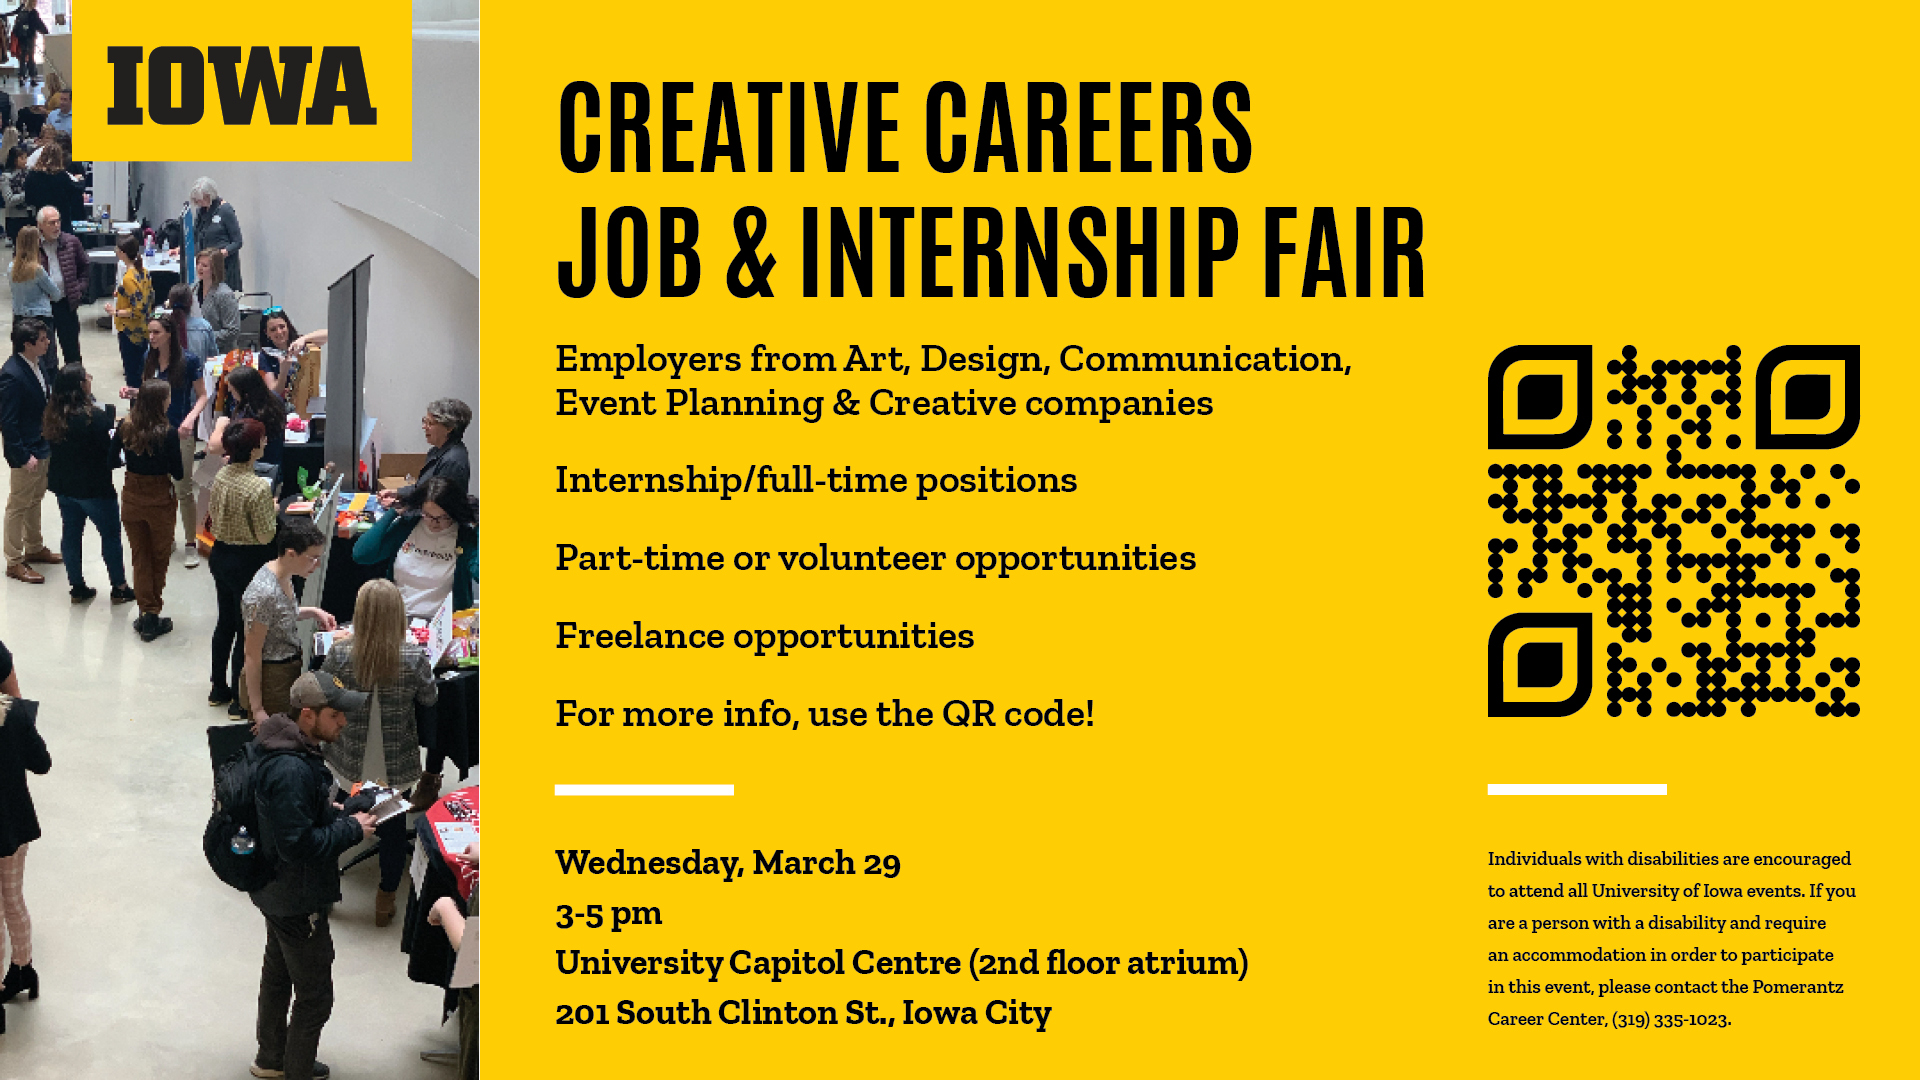 Creative Careers Job & Interview Fair: Wednesday, March 29 3-5 pm